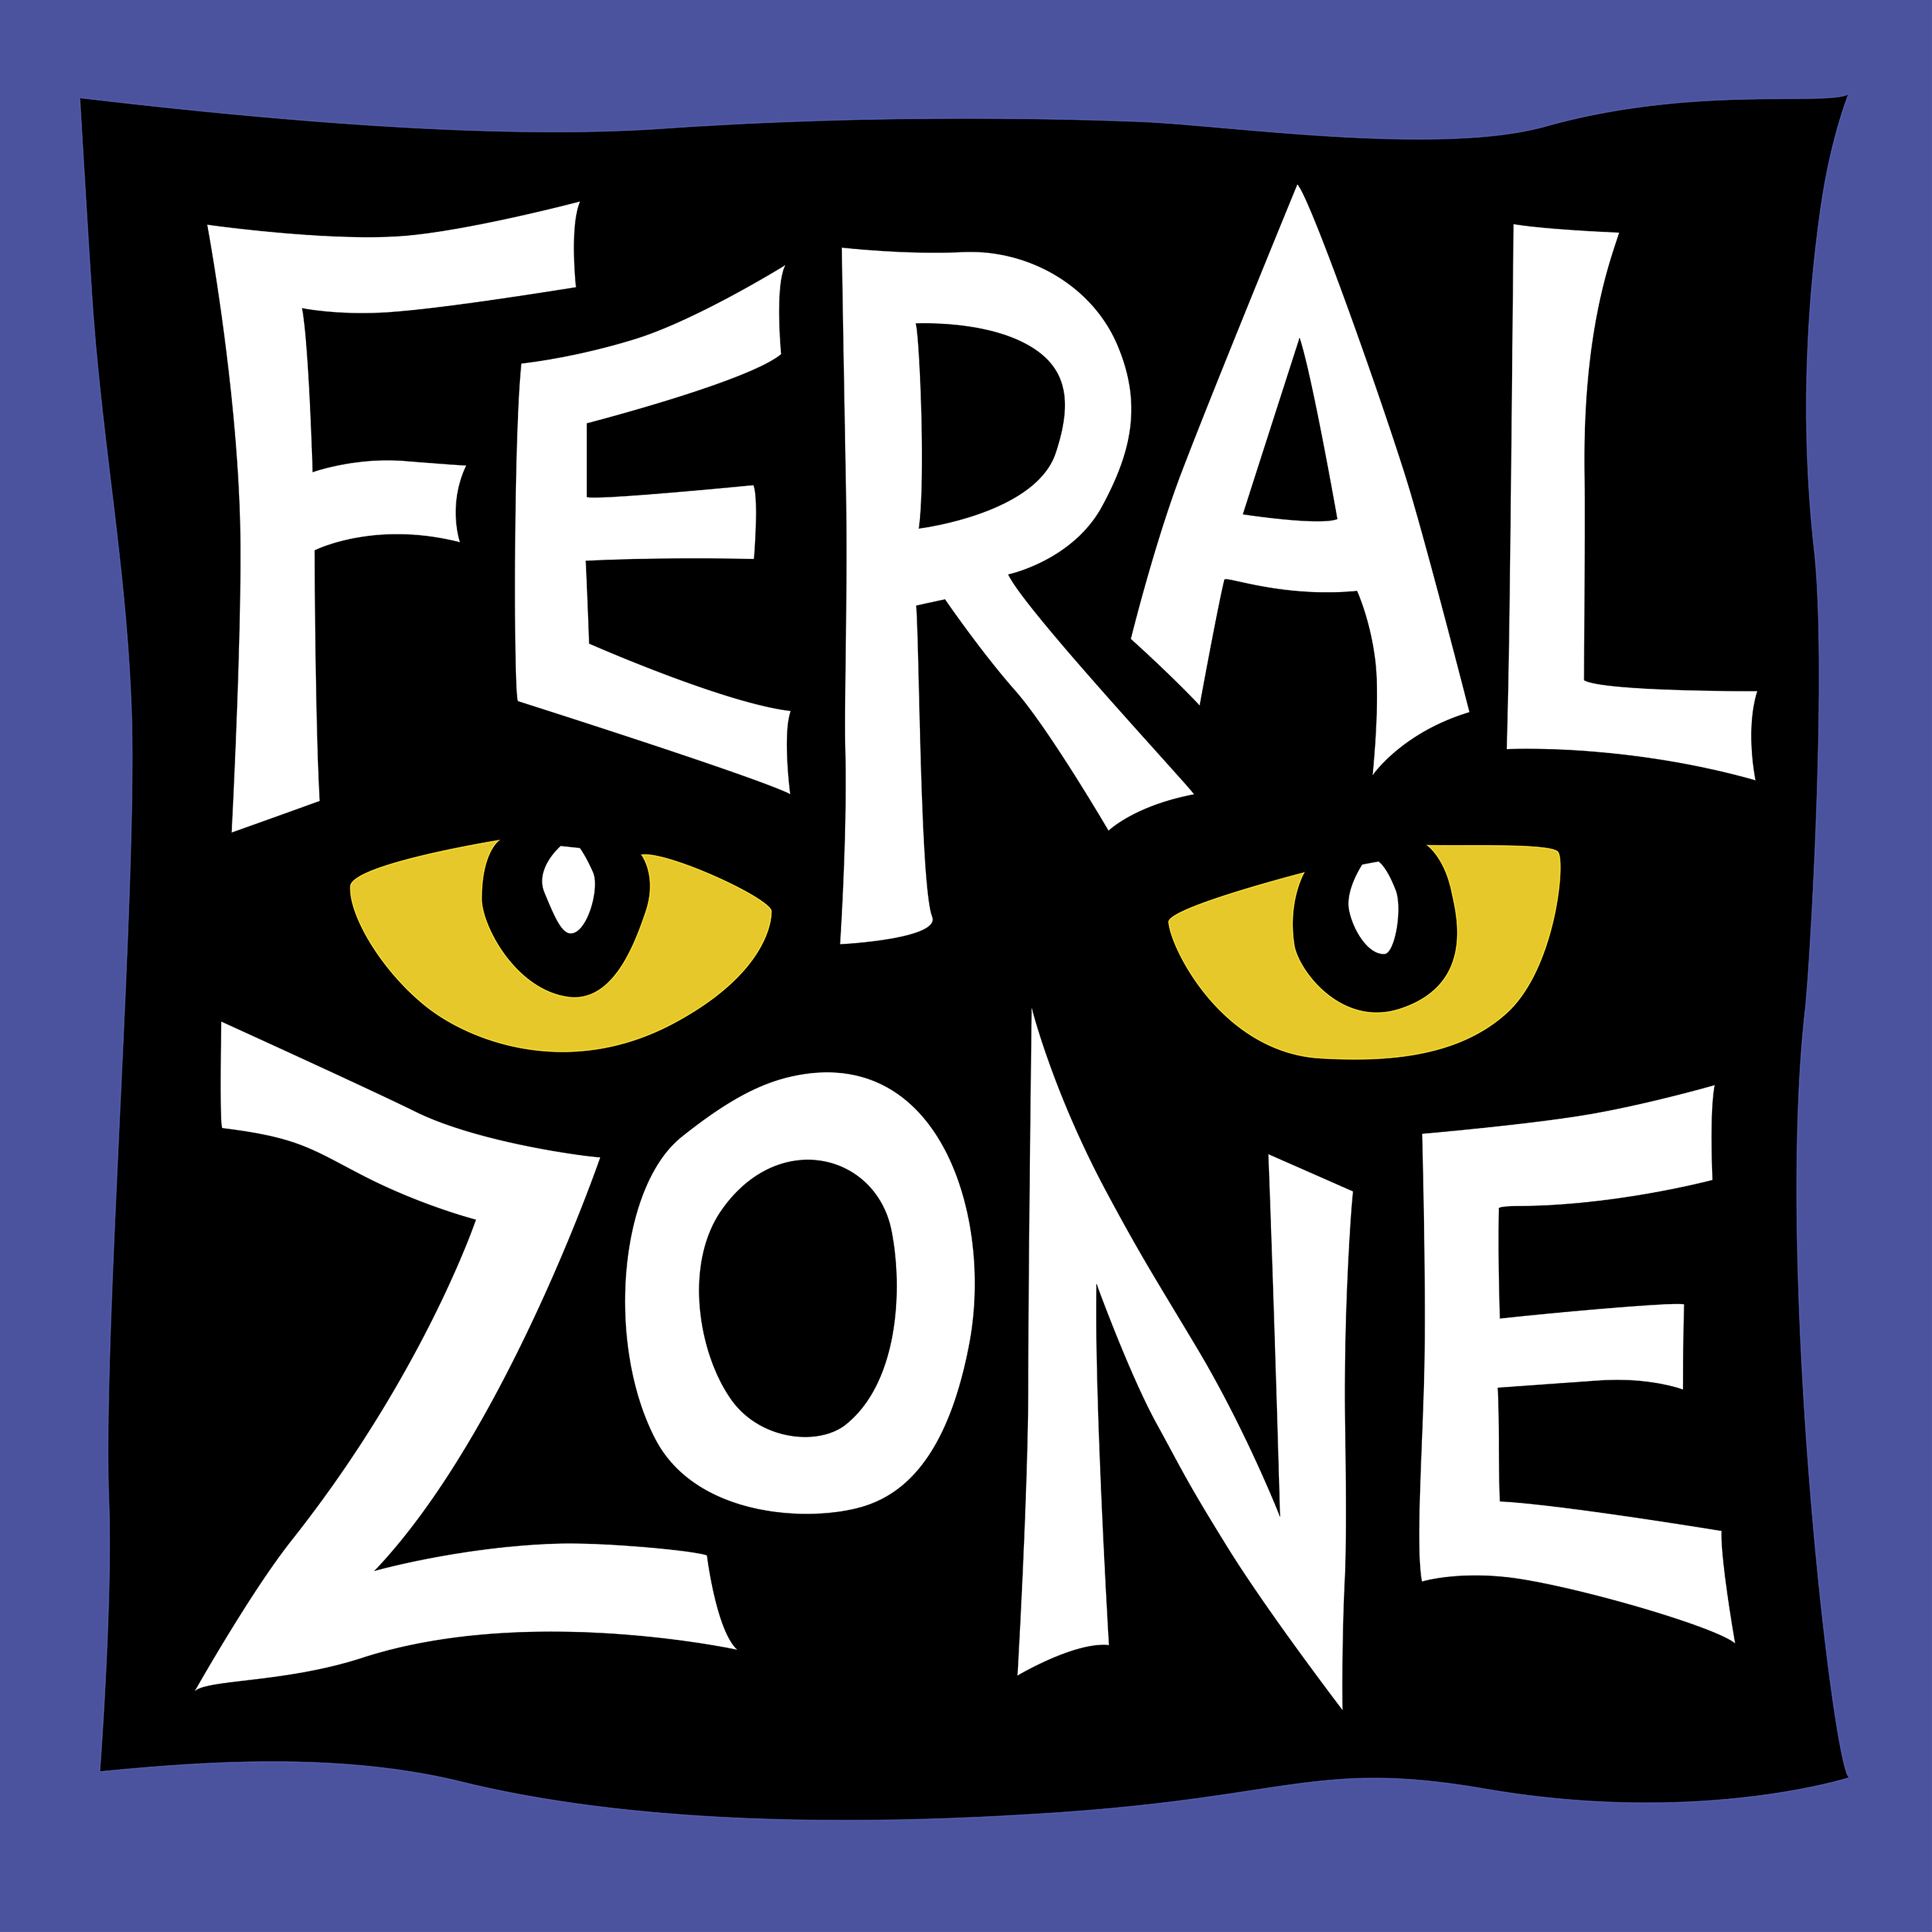 Feral Zone 9: DR. DONALD SCHUELER REVISITED with EDDIE YOUNG and NICOLE PAVY